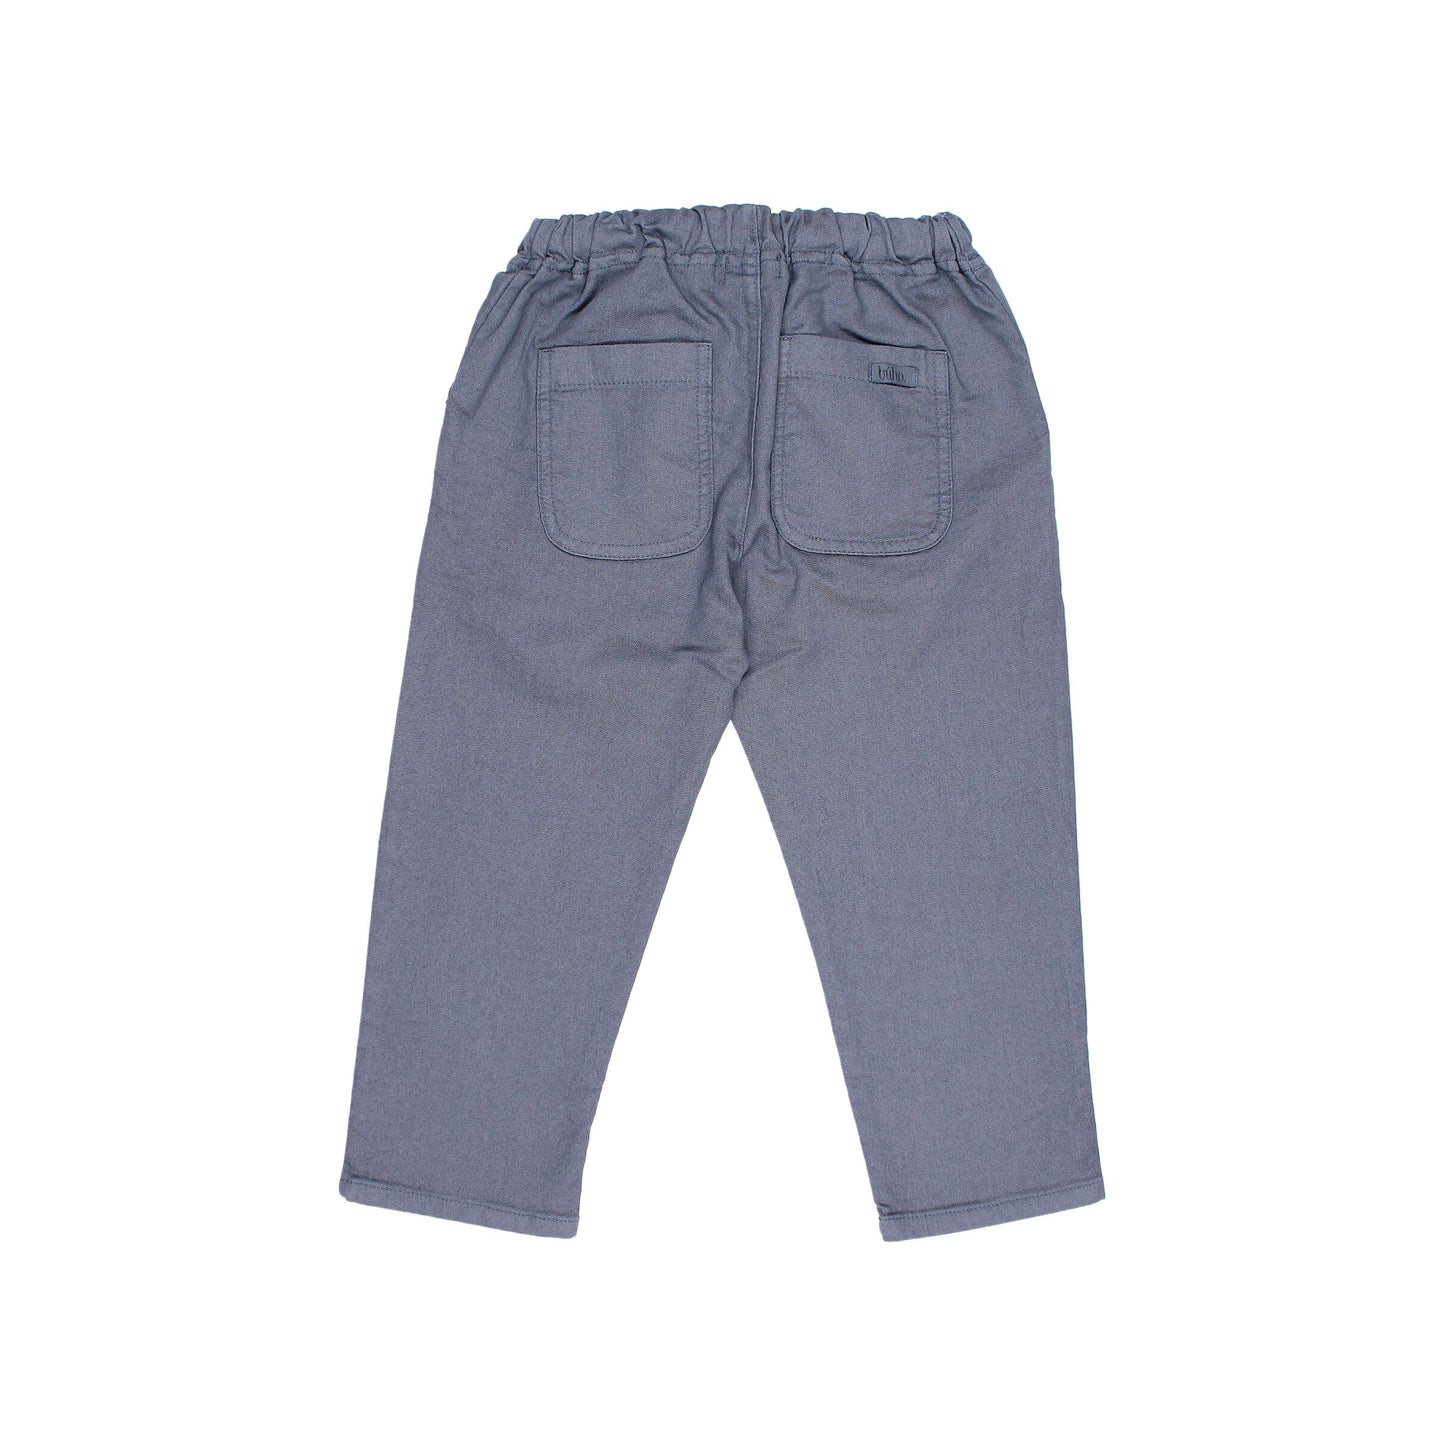 CASUAL PANTS - BLUE STONE